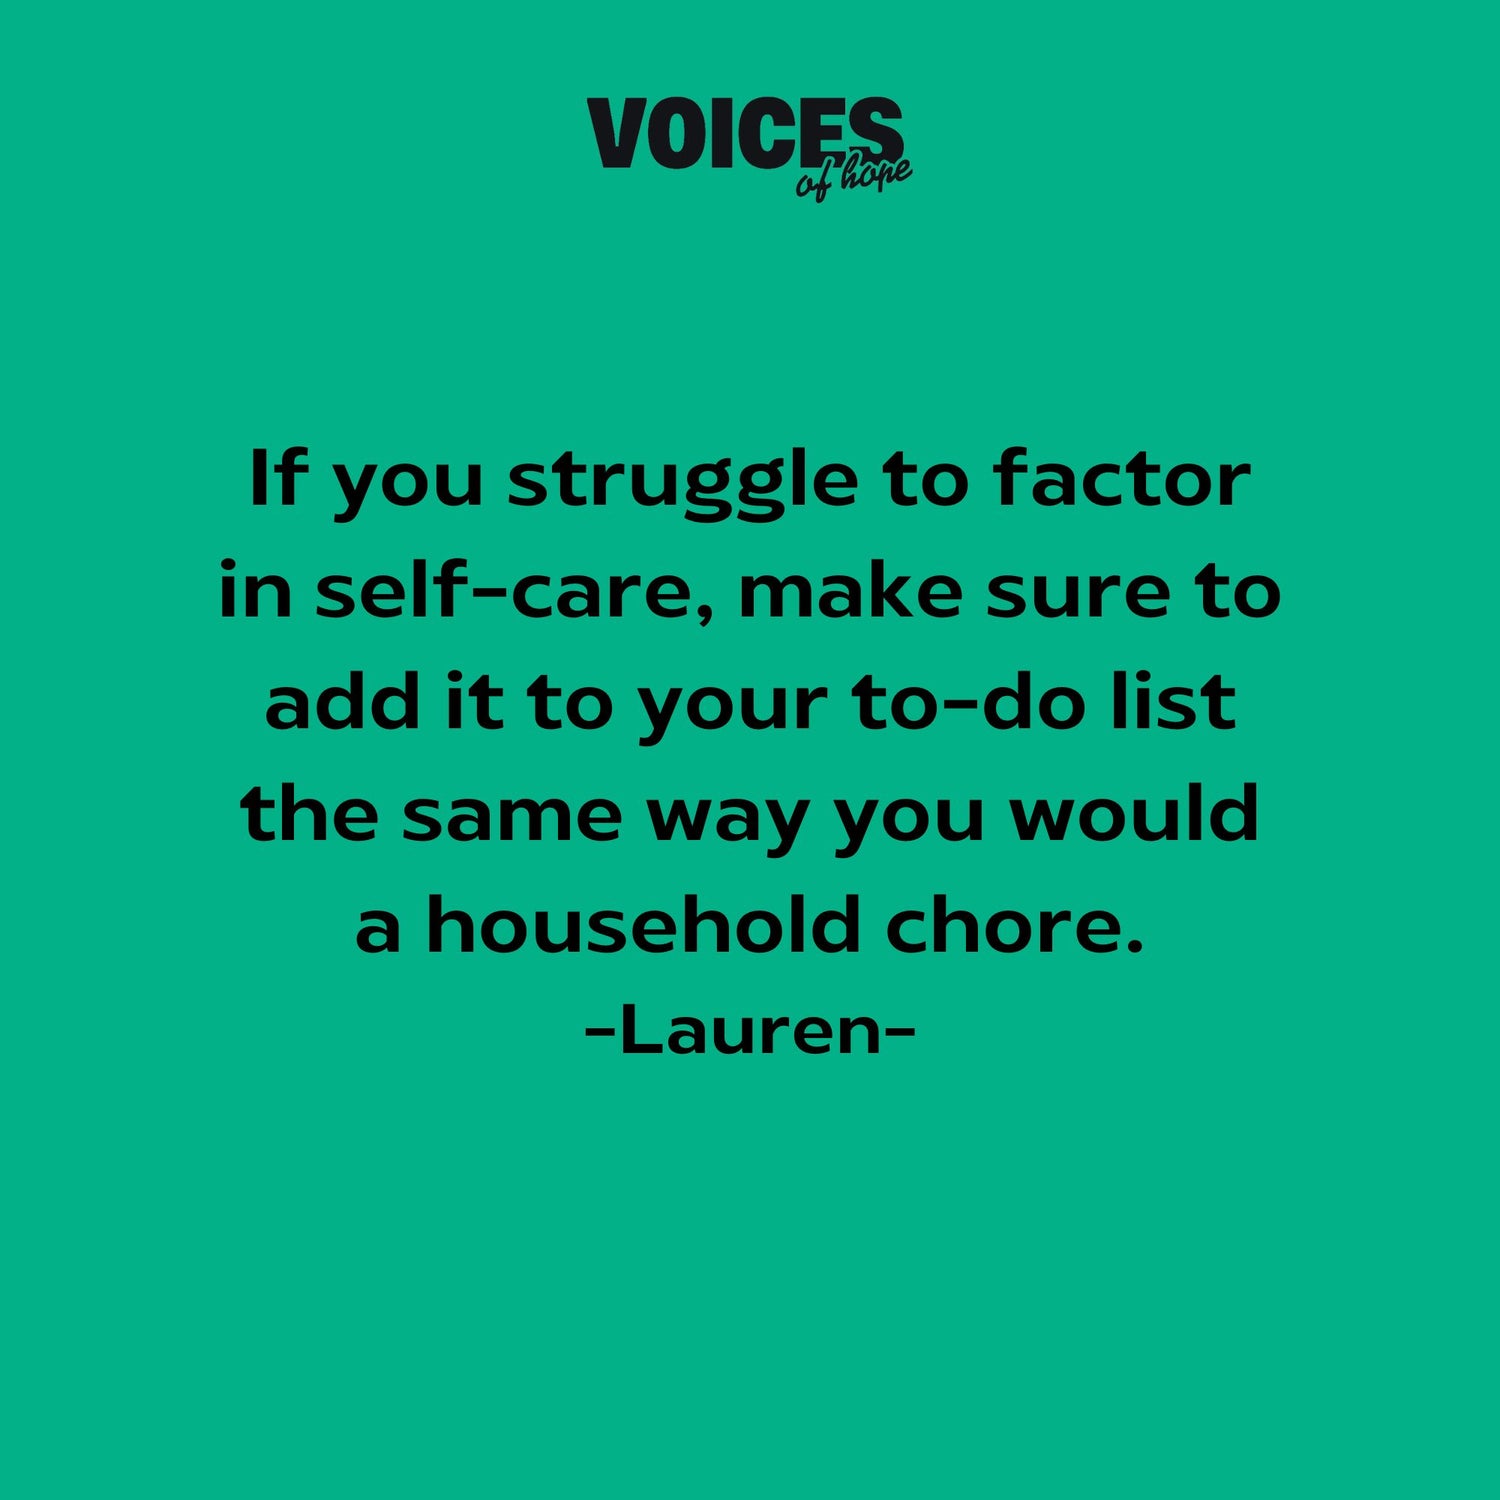 Green background with black writing that reads: "if you struggle to factor in self-care, make sure to add it to your to-do list the same way you would a household chore. Lauren."